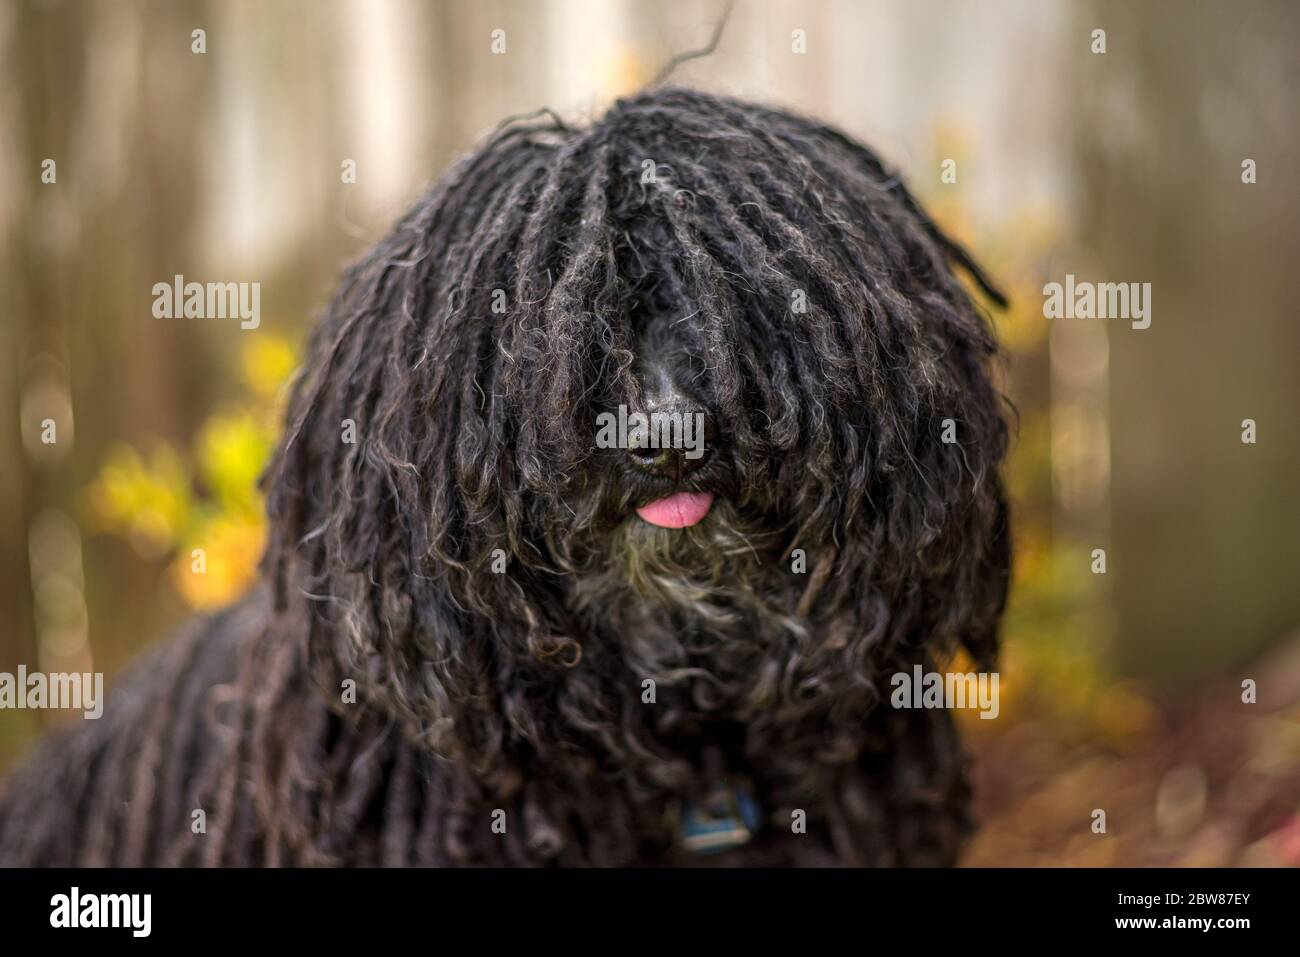 Hungarian Puli (Pulik) with Show Quality Cords Portrait Stock Photo